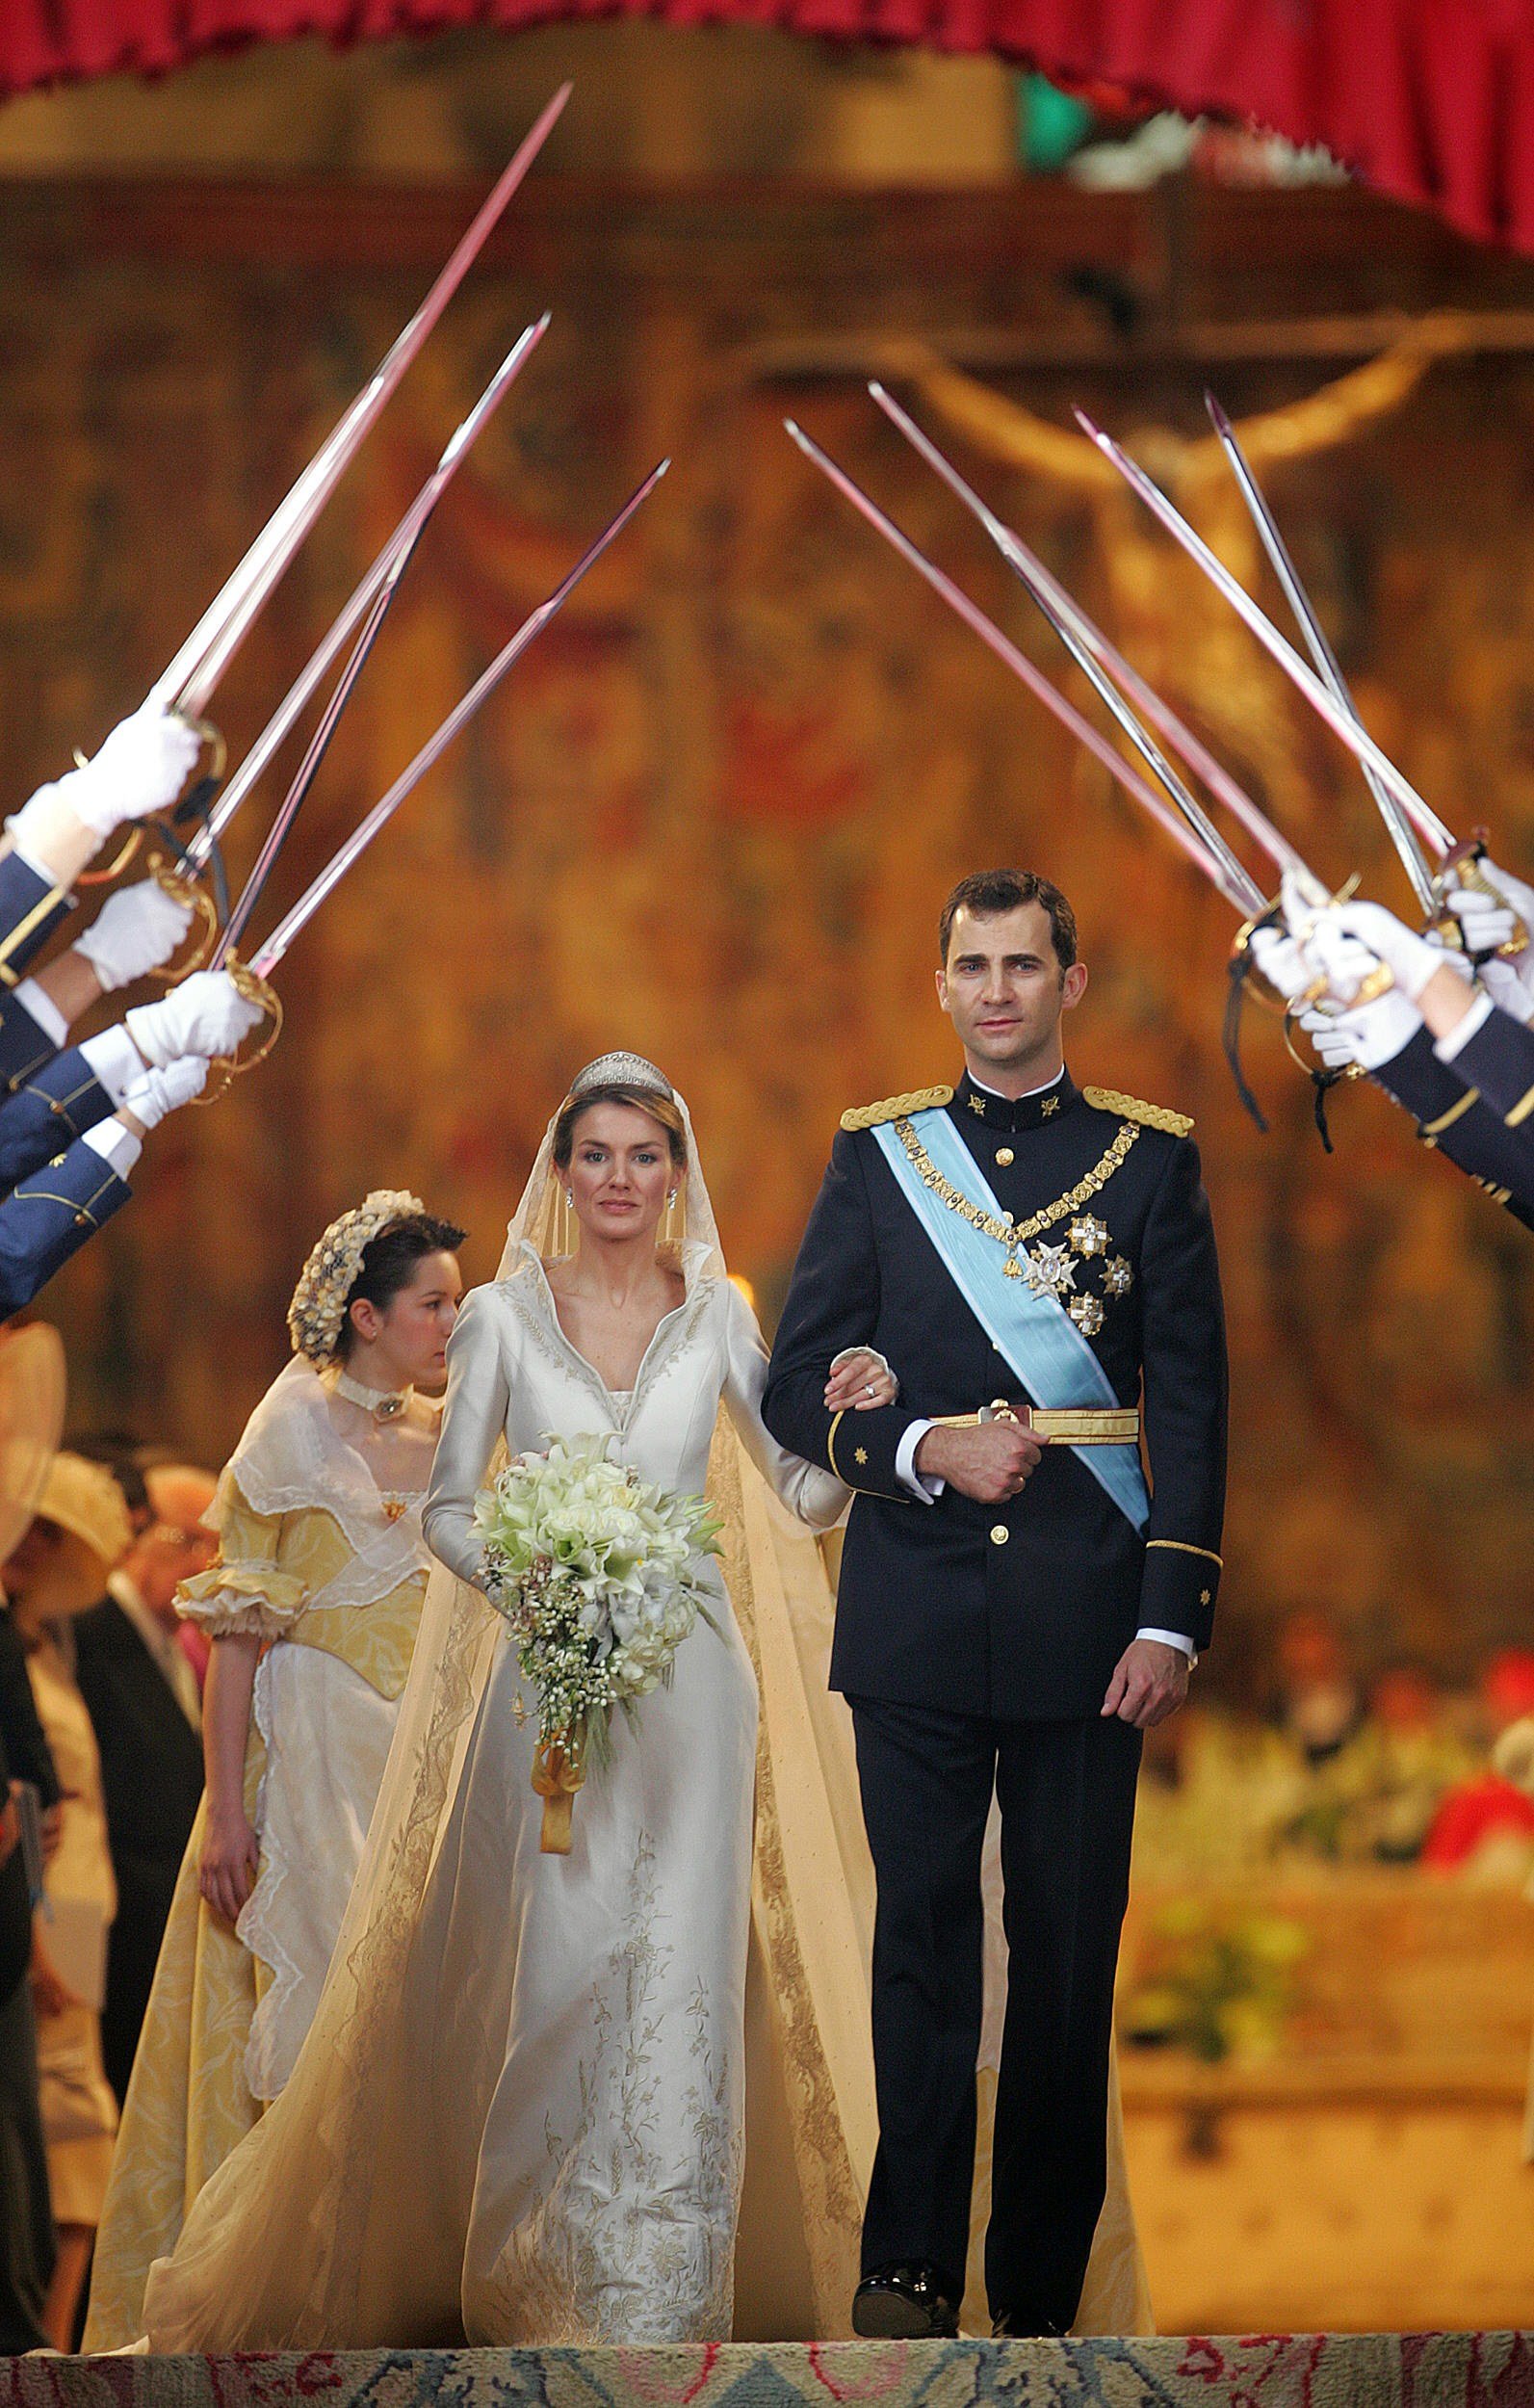 Letizia Ortiz and Spanish Crown Prince Felipe pictured as newlyweds at Madrid's Almudena Cathedral at the end of their wedding ceremony on May 22, 2004. / Source: Getty Images